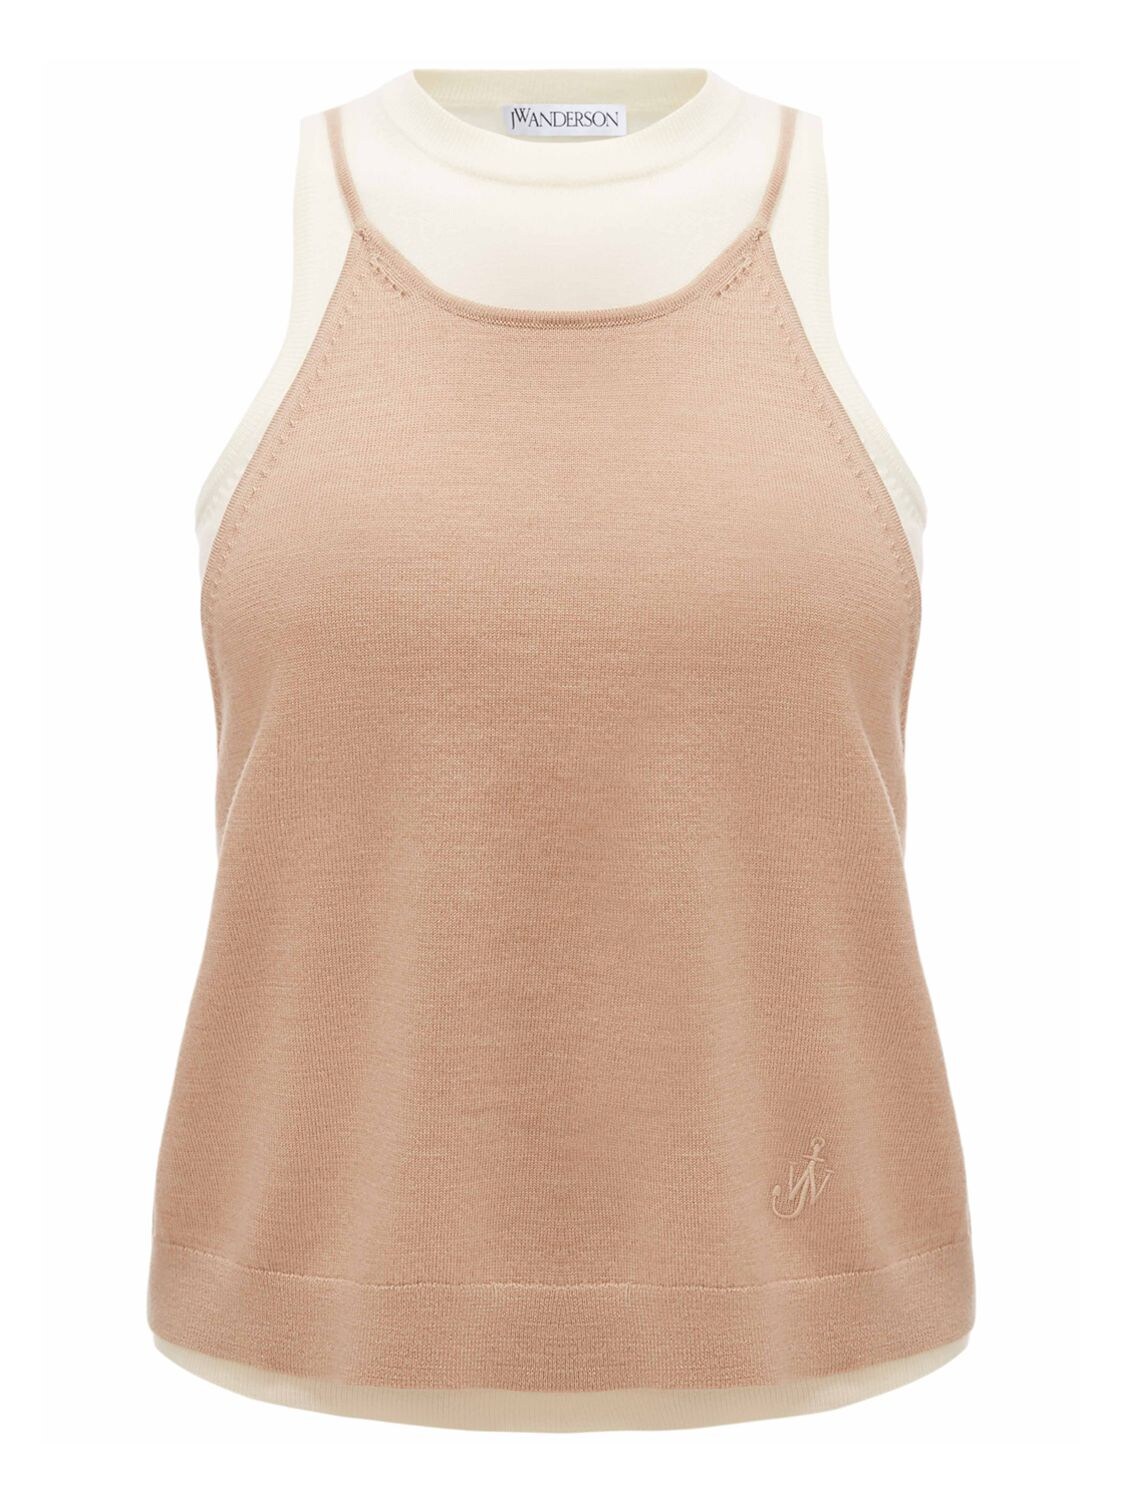 JW ANDERSON LAYERED TWO-IN-ONE WOOL KNIT TANK TOP